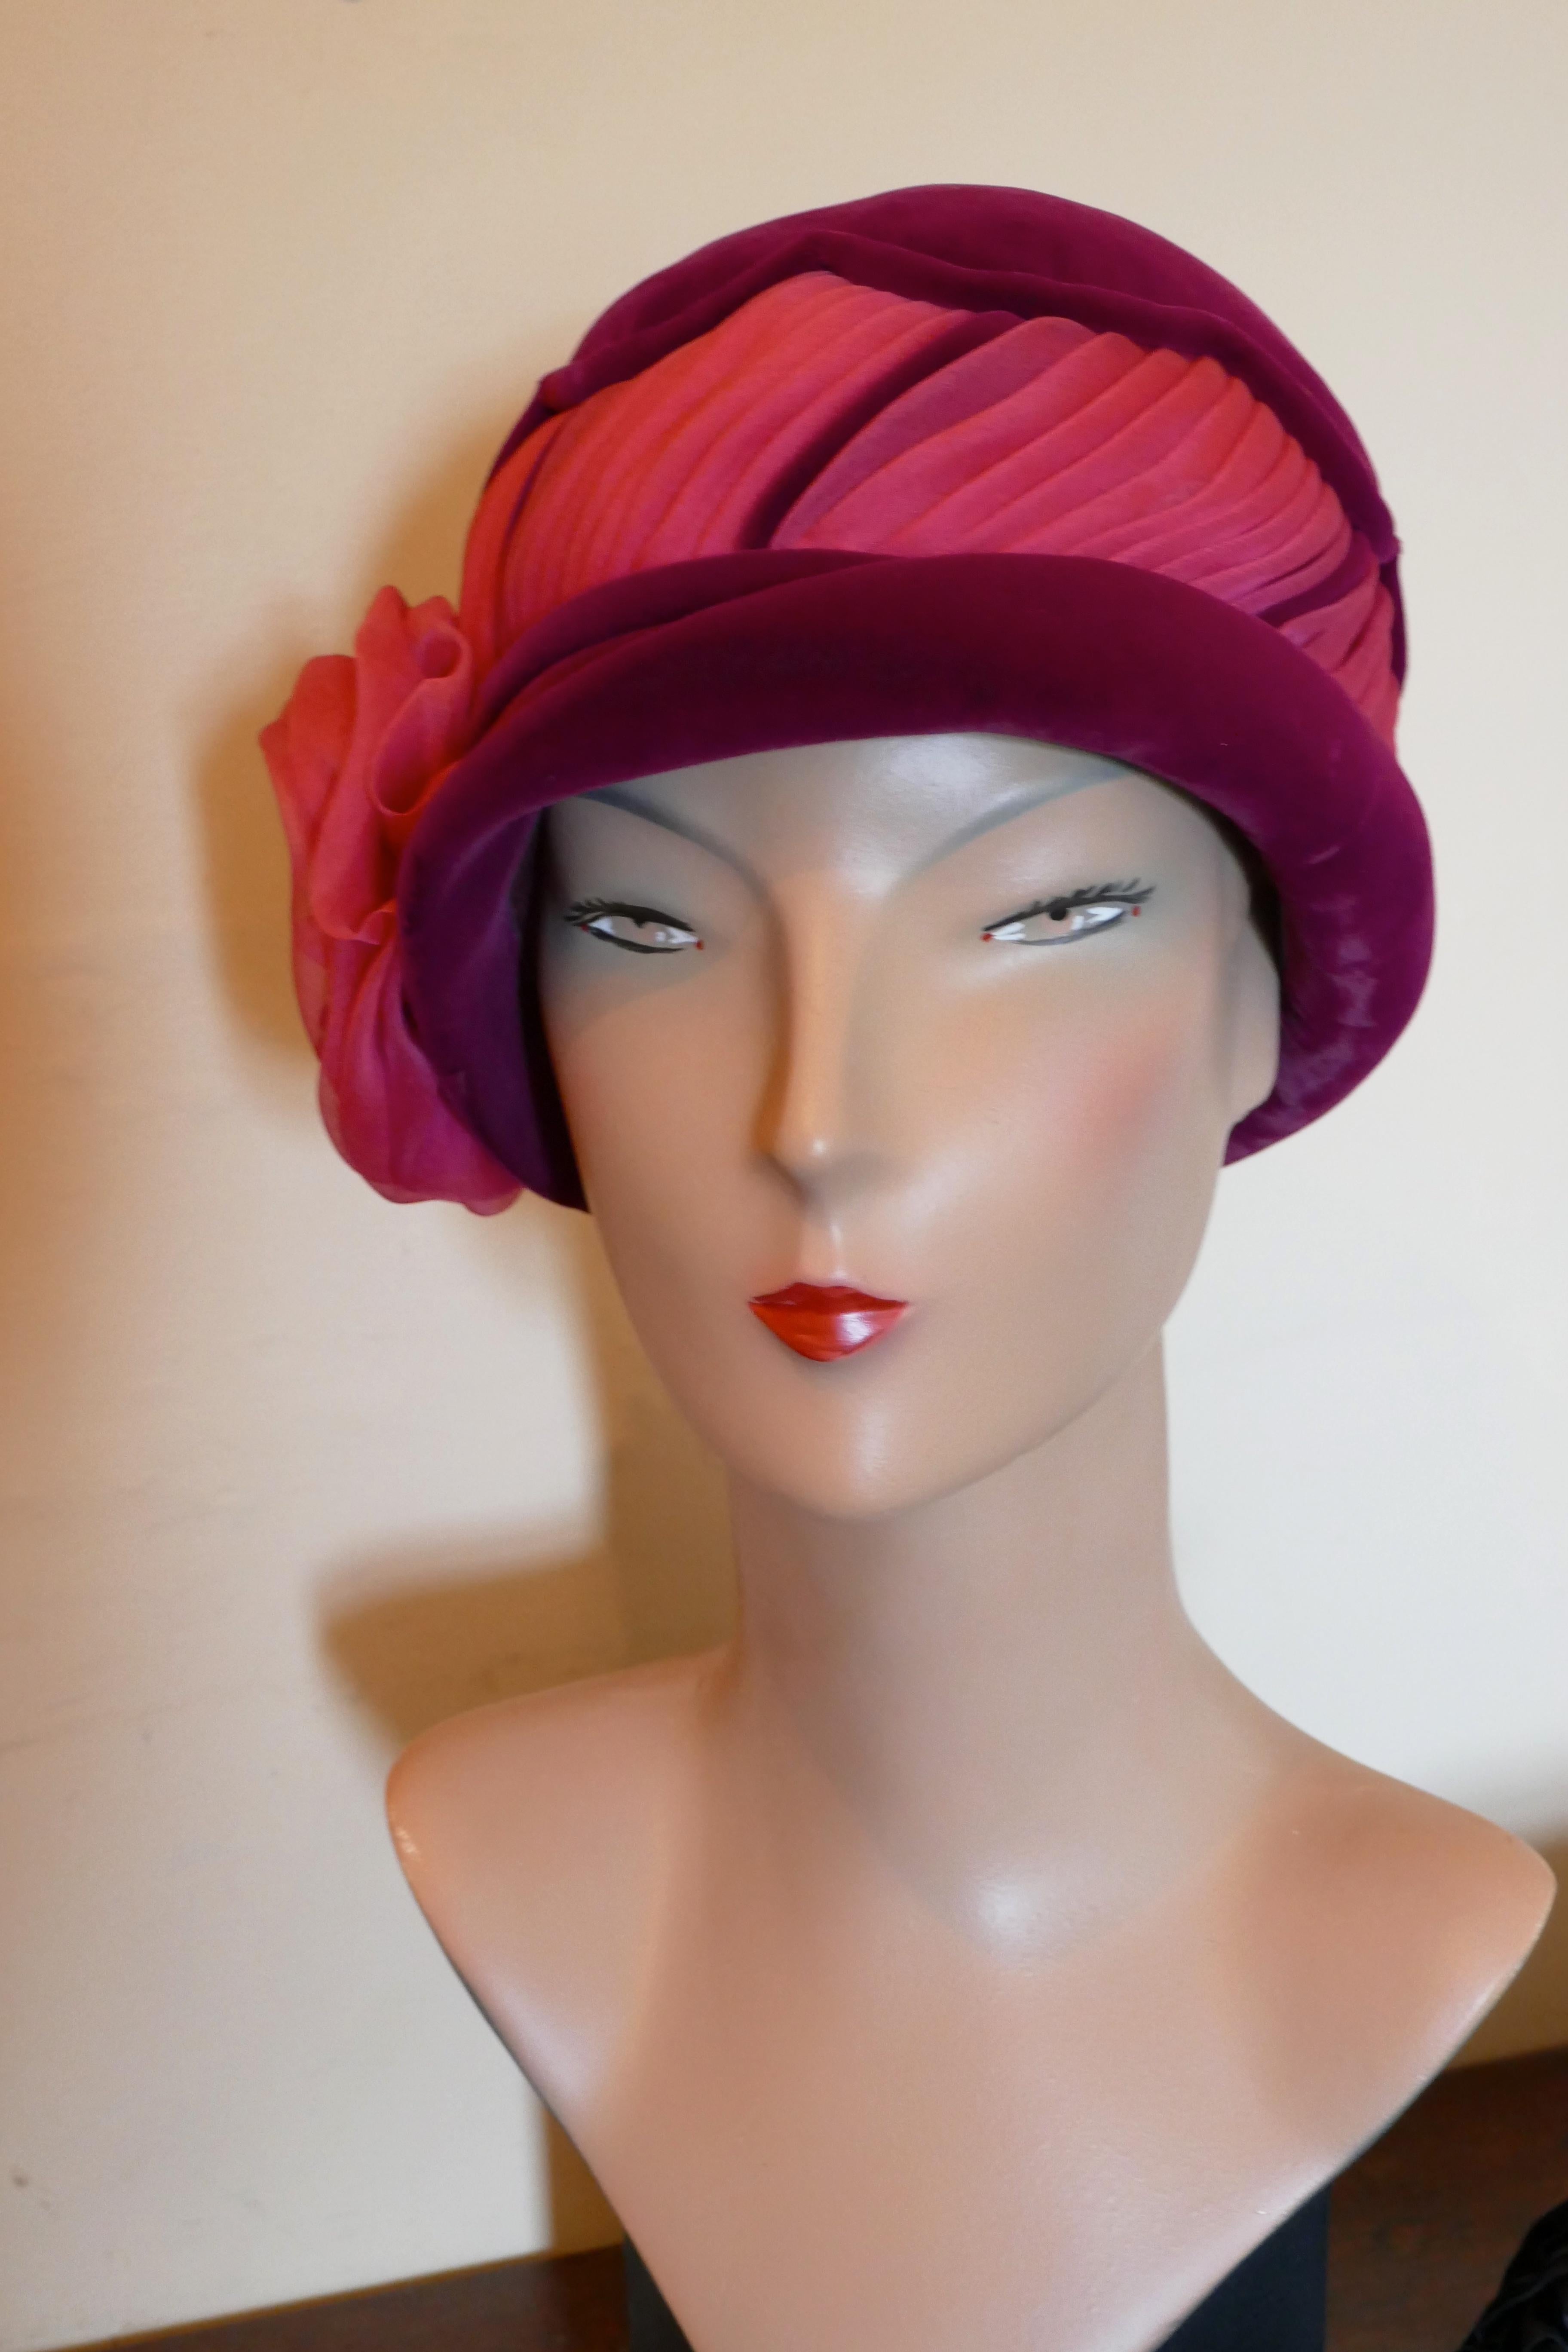 1960s Vintage Plush Velvet Cloche Hat by Mitzi Lorenz London W1

Superb Quality Plush Velvet Magenta Cloche hat with a deep gathered Cerise chiffon trim and a stunning chiffon rose to one side
The hat has a small rolled brim, it is satin lined, it